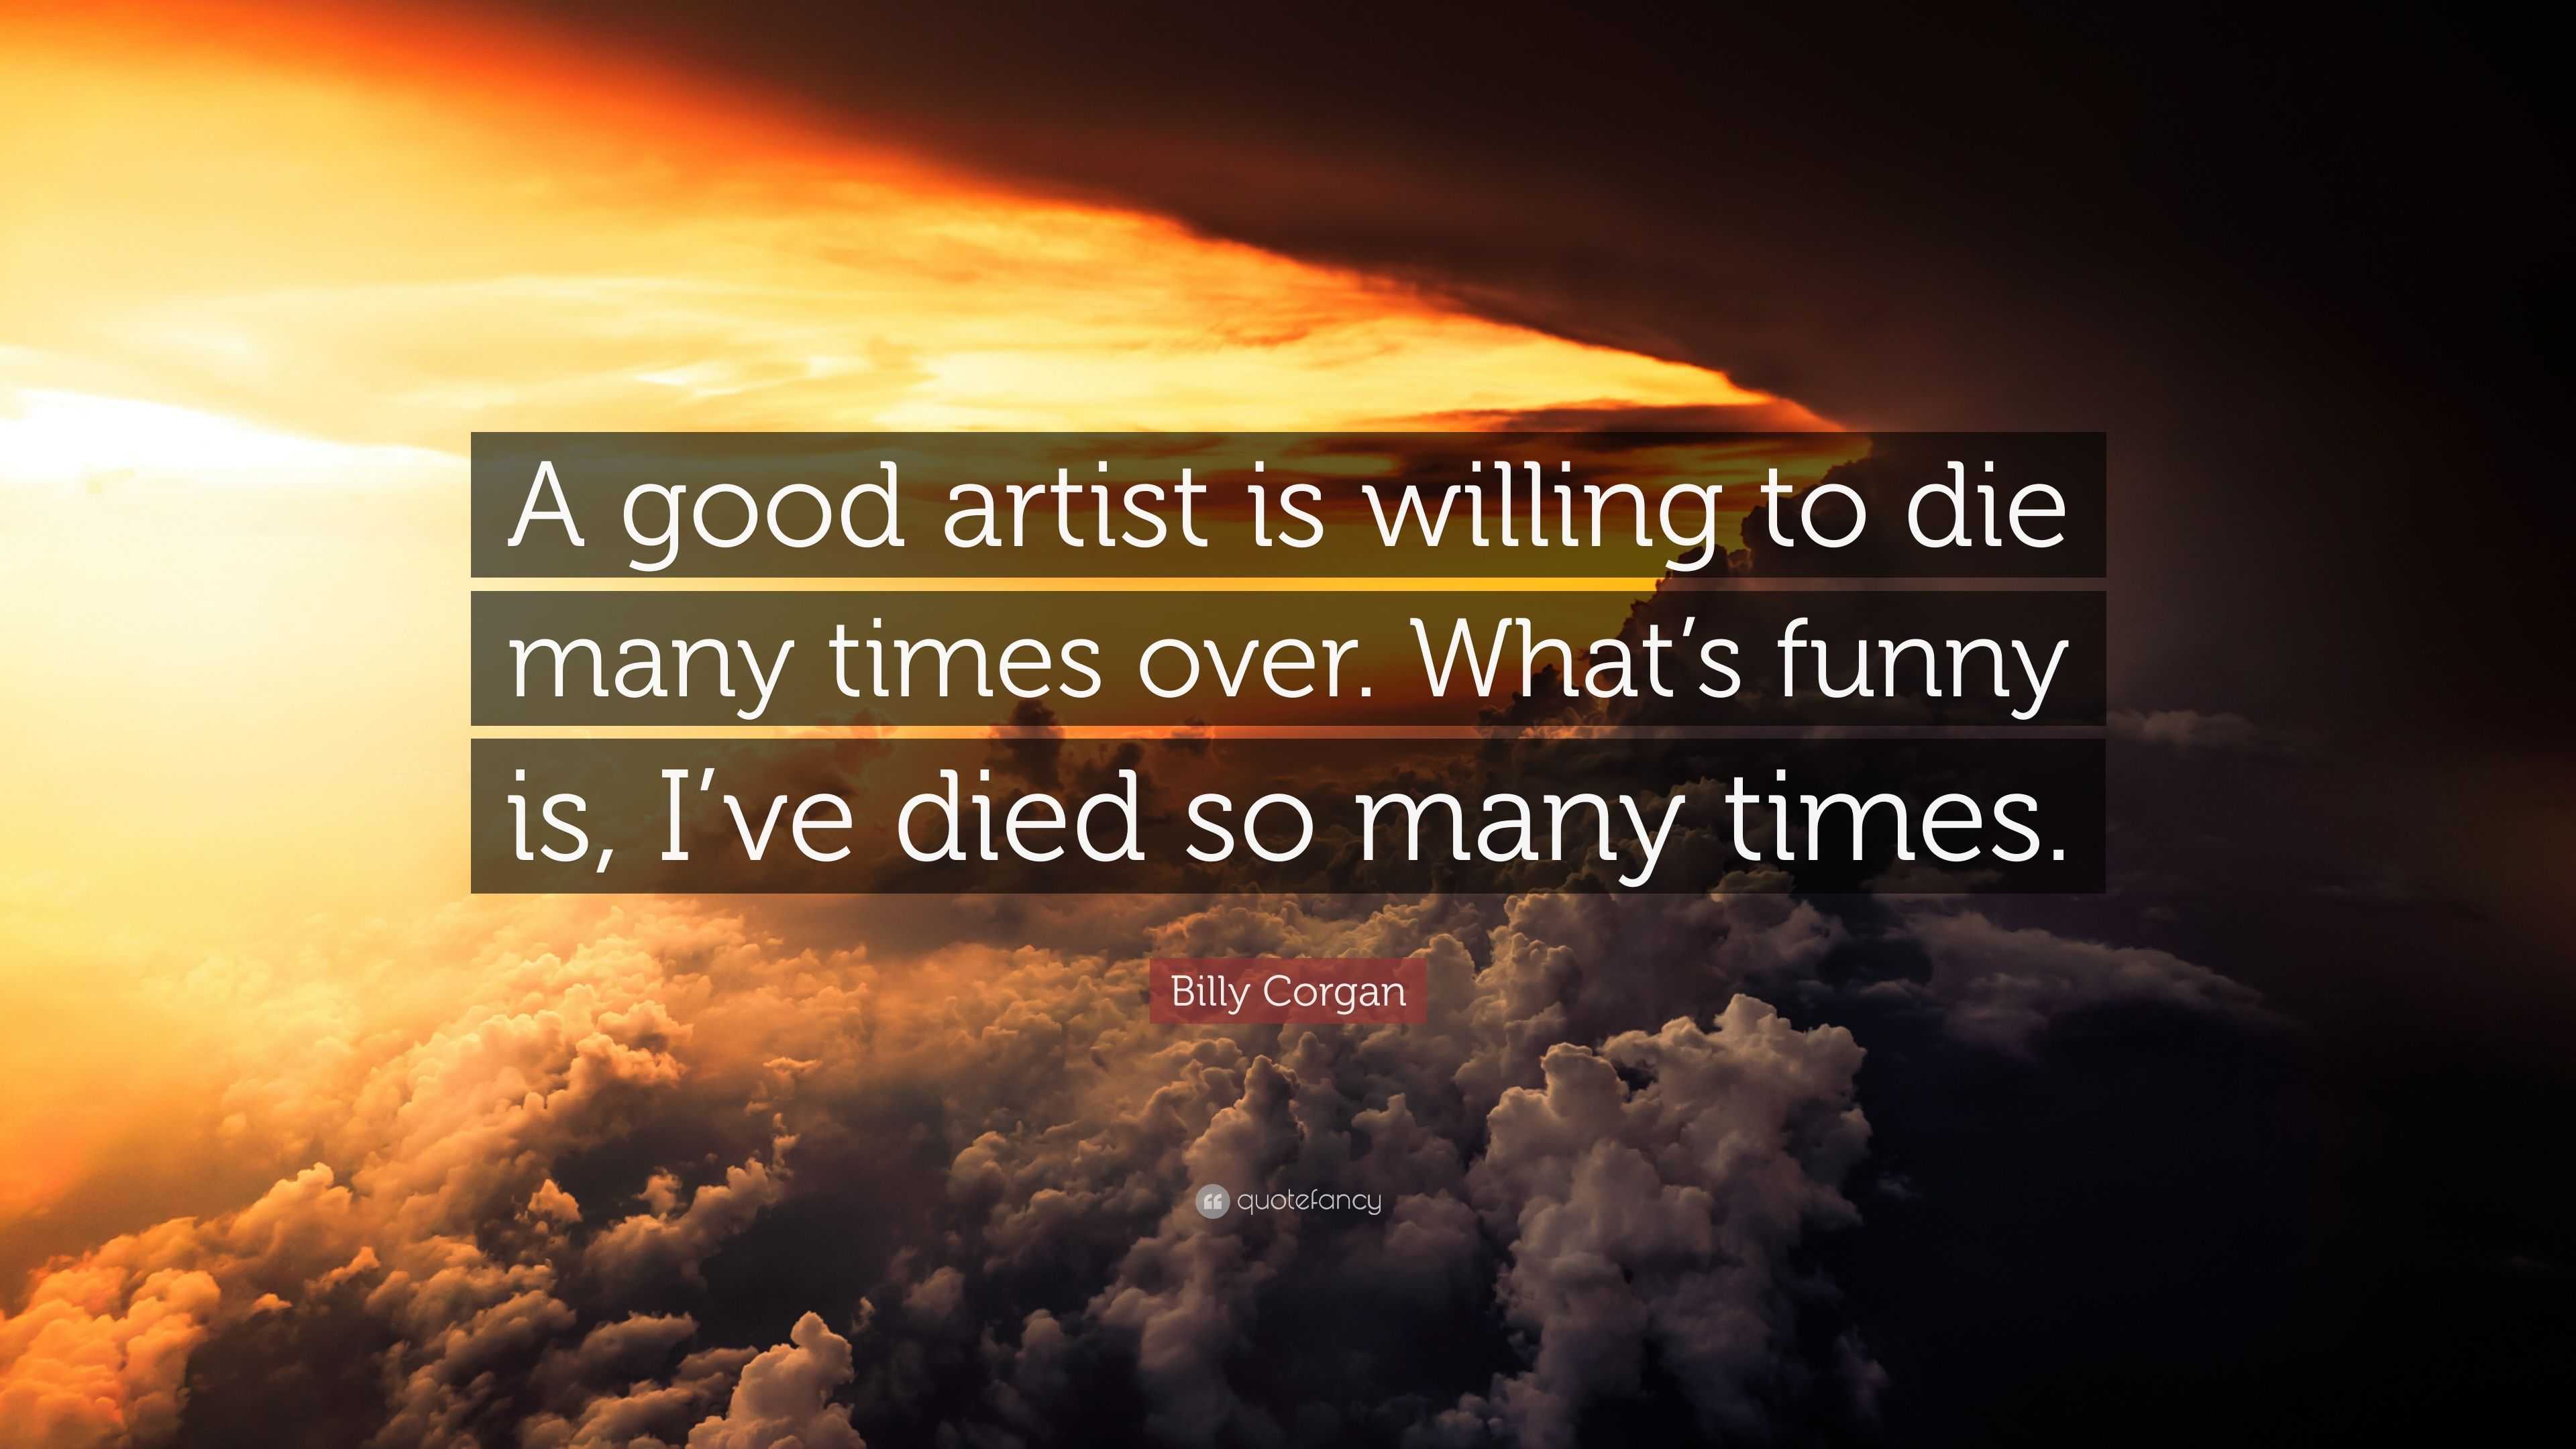 Billy Corgan Quote: “A good artist is willing to die many times over.  What's funny is,